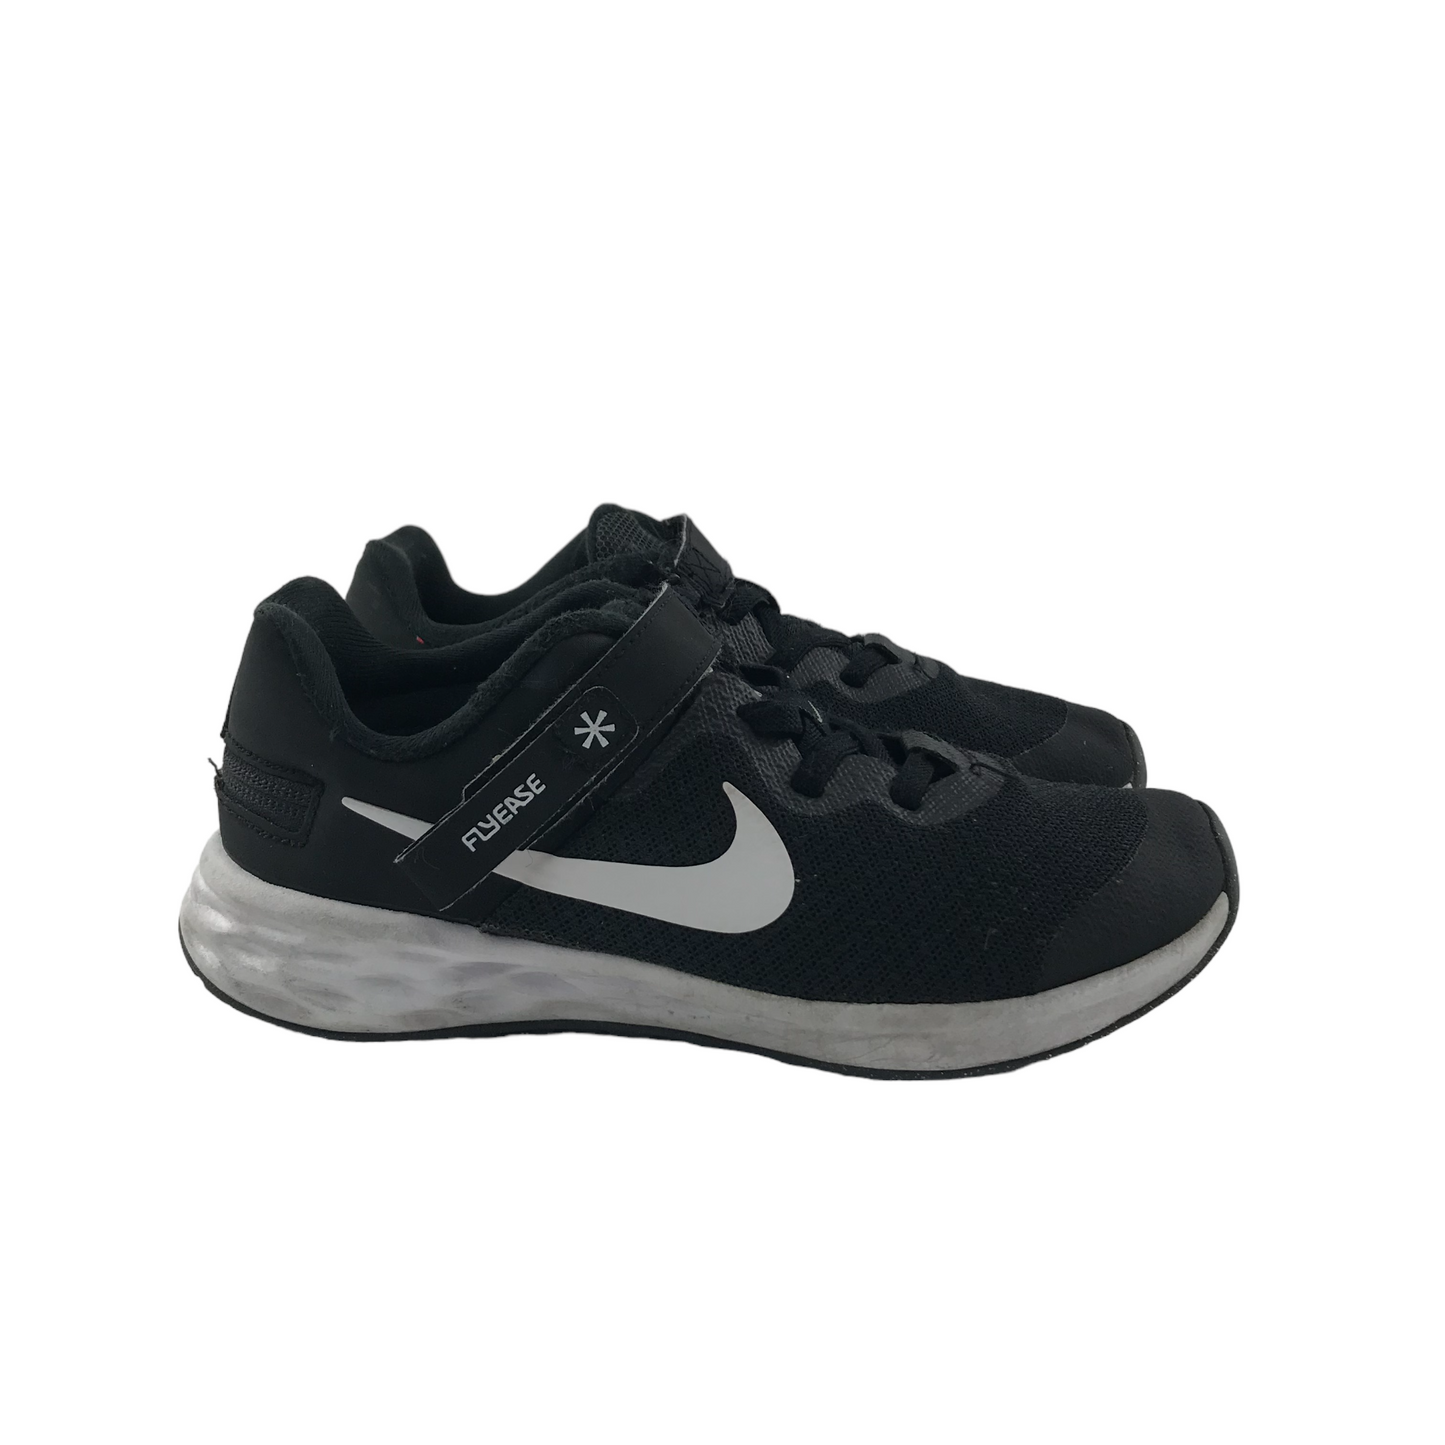 Nike Revolution Flyease Running Trainers Shoe Size 1 Black with Laces